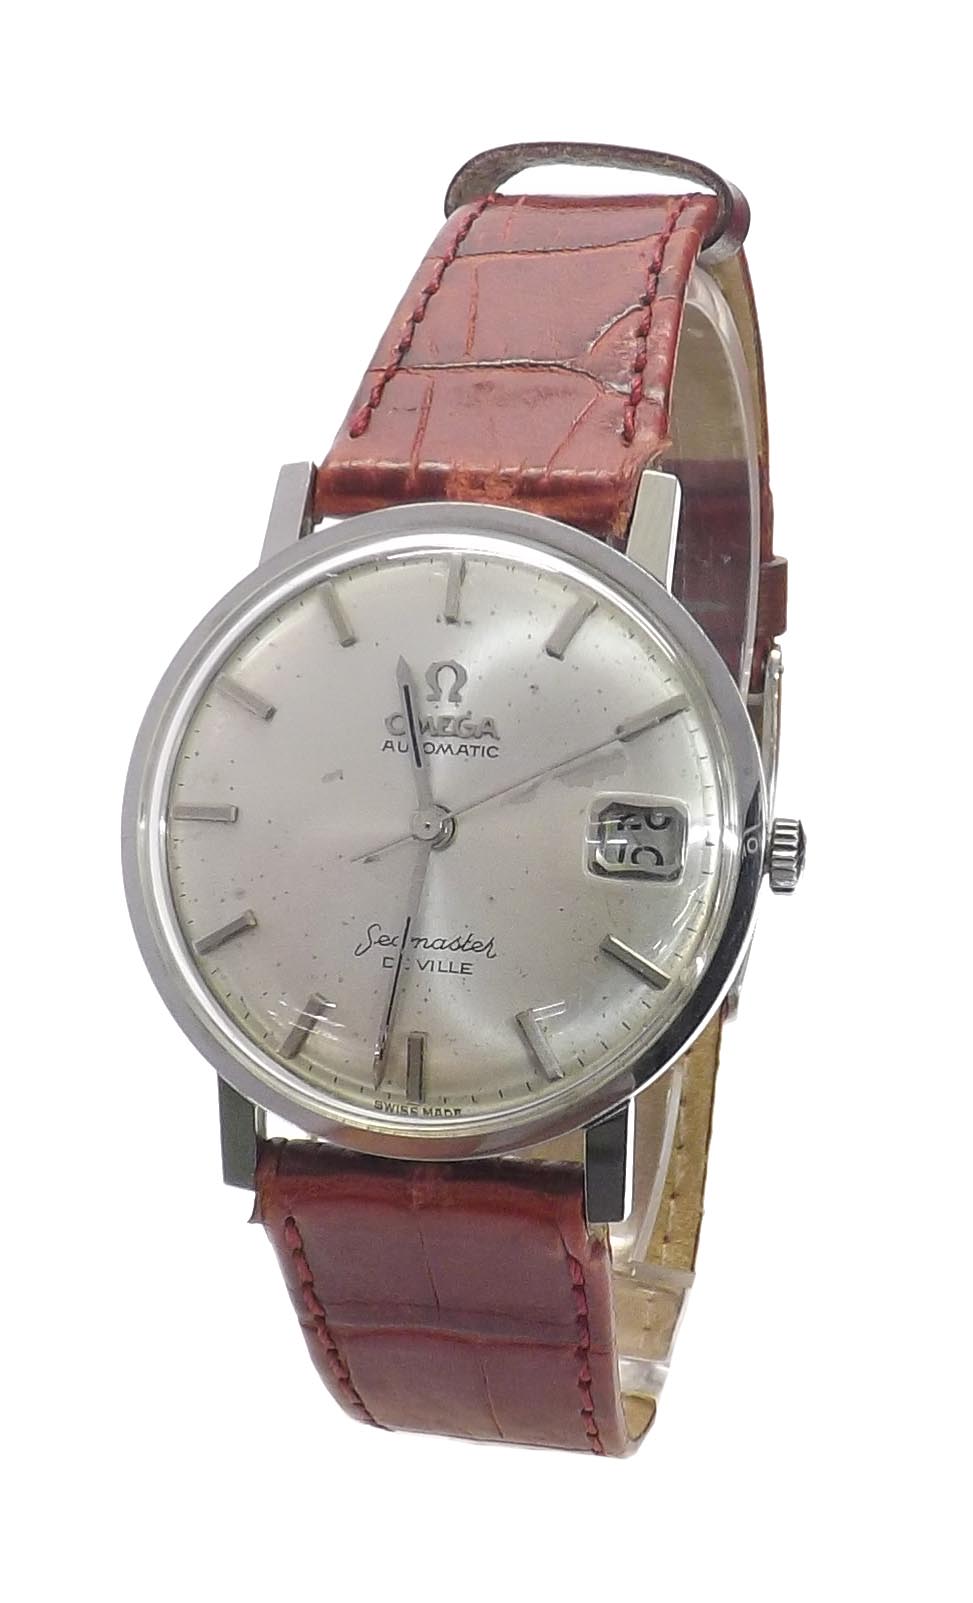 Omega Seamaster De Ville automatic stainless steel gentleman's wristwatch, circa 1968, ref. 162.009, - Image 2 of 3